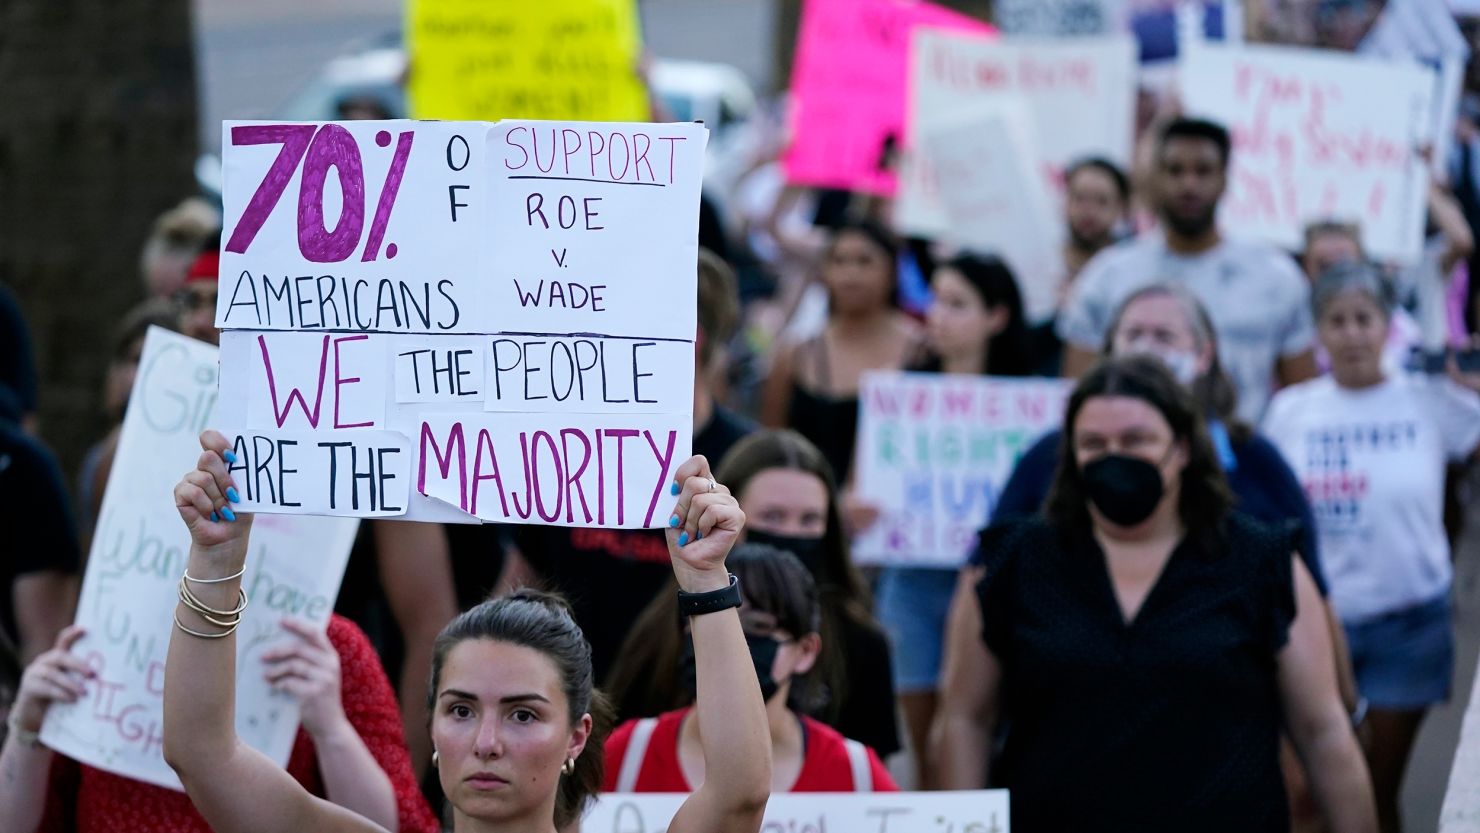 Protesters march around the Arizona Capitol in Phoenix after the Supreme Court decision to overturn Roe v. Wade, Friday, June 24, 2022.